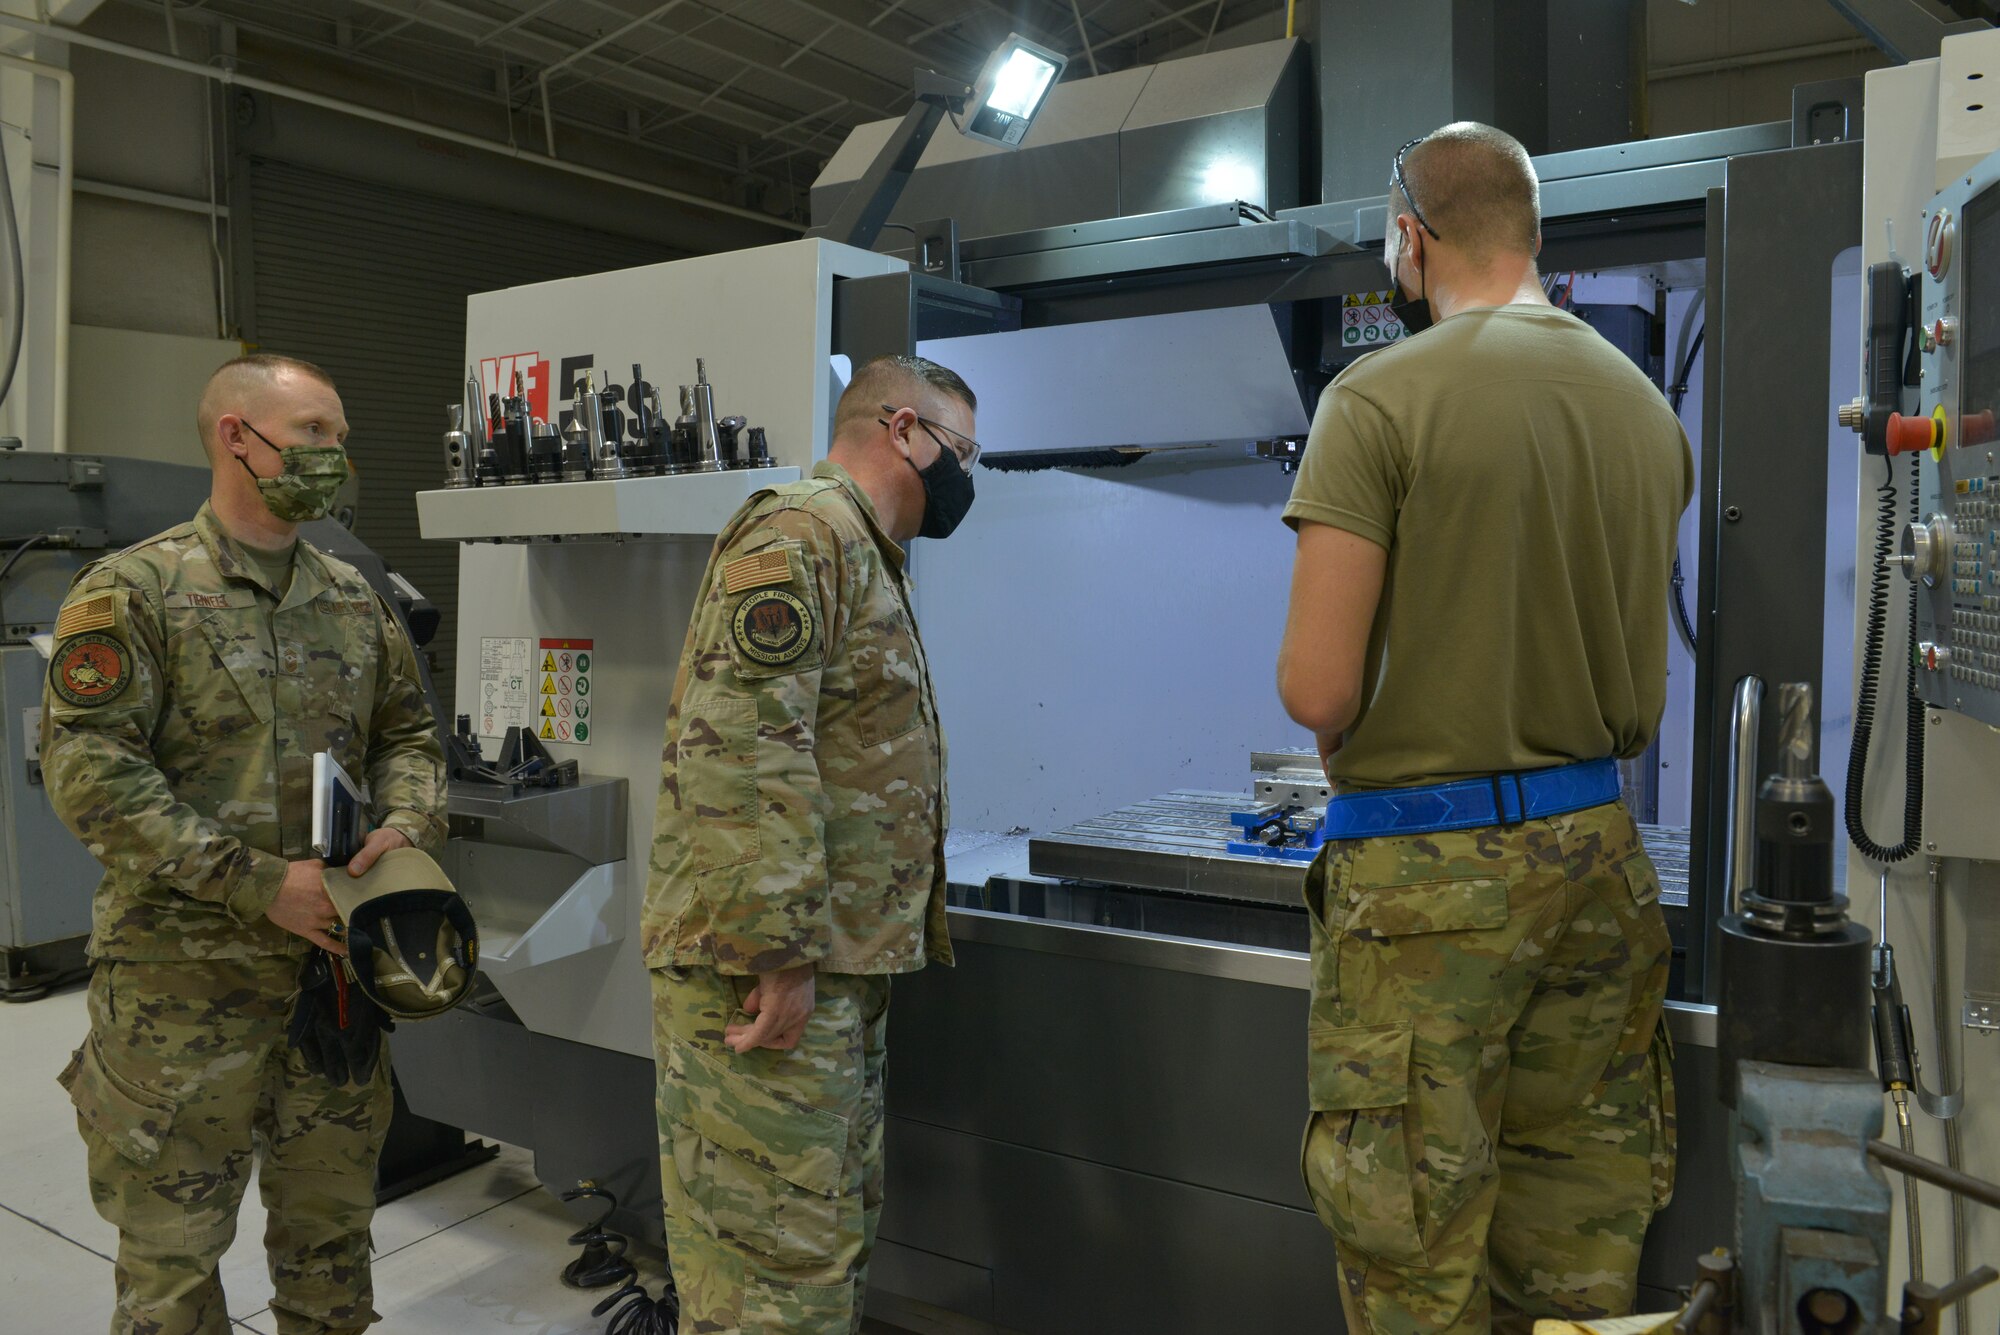 U.S. Air Force Tech. Sgt. Issac McDonald, right,  366th Maintenance Squadron metals tech craftsman, briefs Command Chief Master Sgt. David Wade, Air Combat Command, and Chief Master Sgt. Joshua Tidwell, 366th Fighter Wing command chief, on the Computer Numeric Control (CNC) machine, on Mountain Home Air Force Base, Idaho, Nov. 9, 2021. This machine uses a cutter tool with careful calculations to coordinate data input into the machine, to make precision cuts to any block material that the Airmen place into the machine.